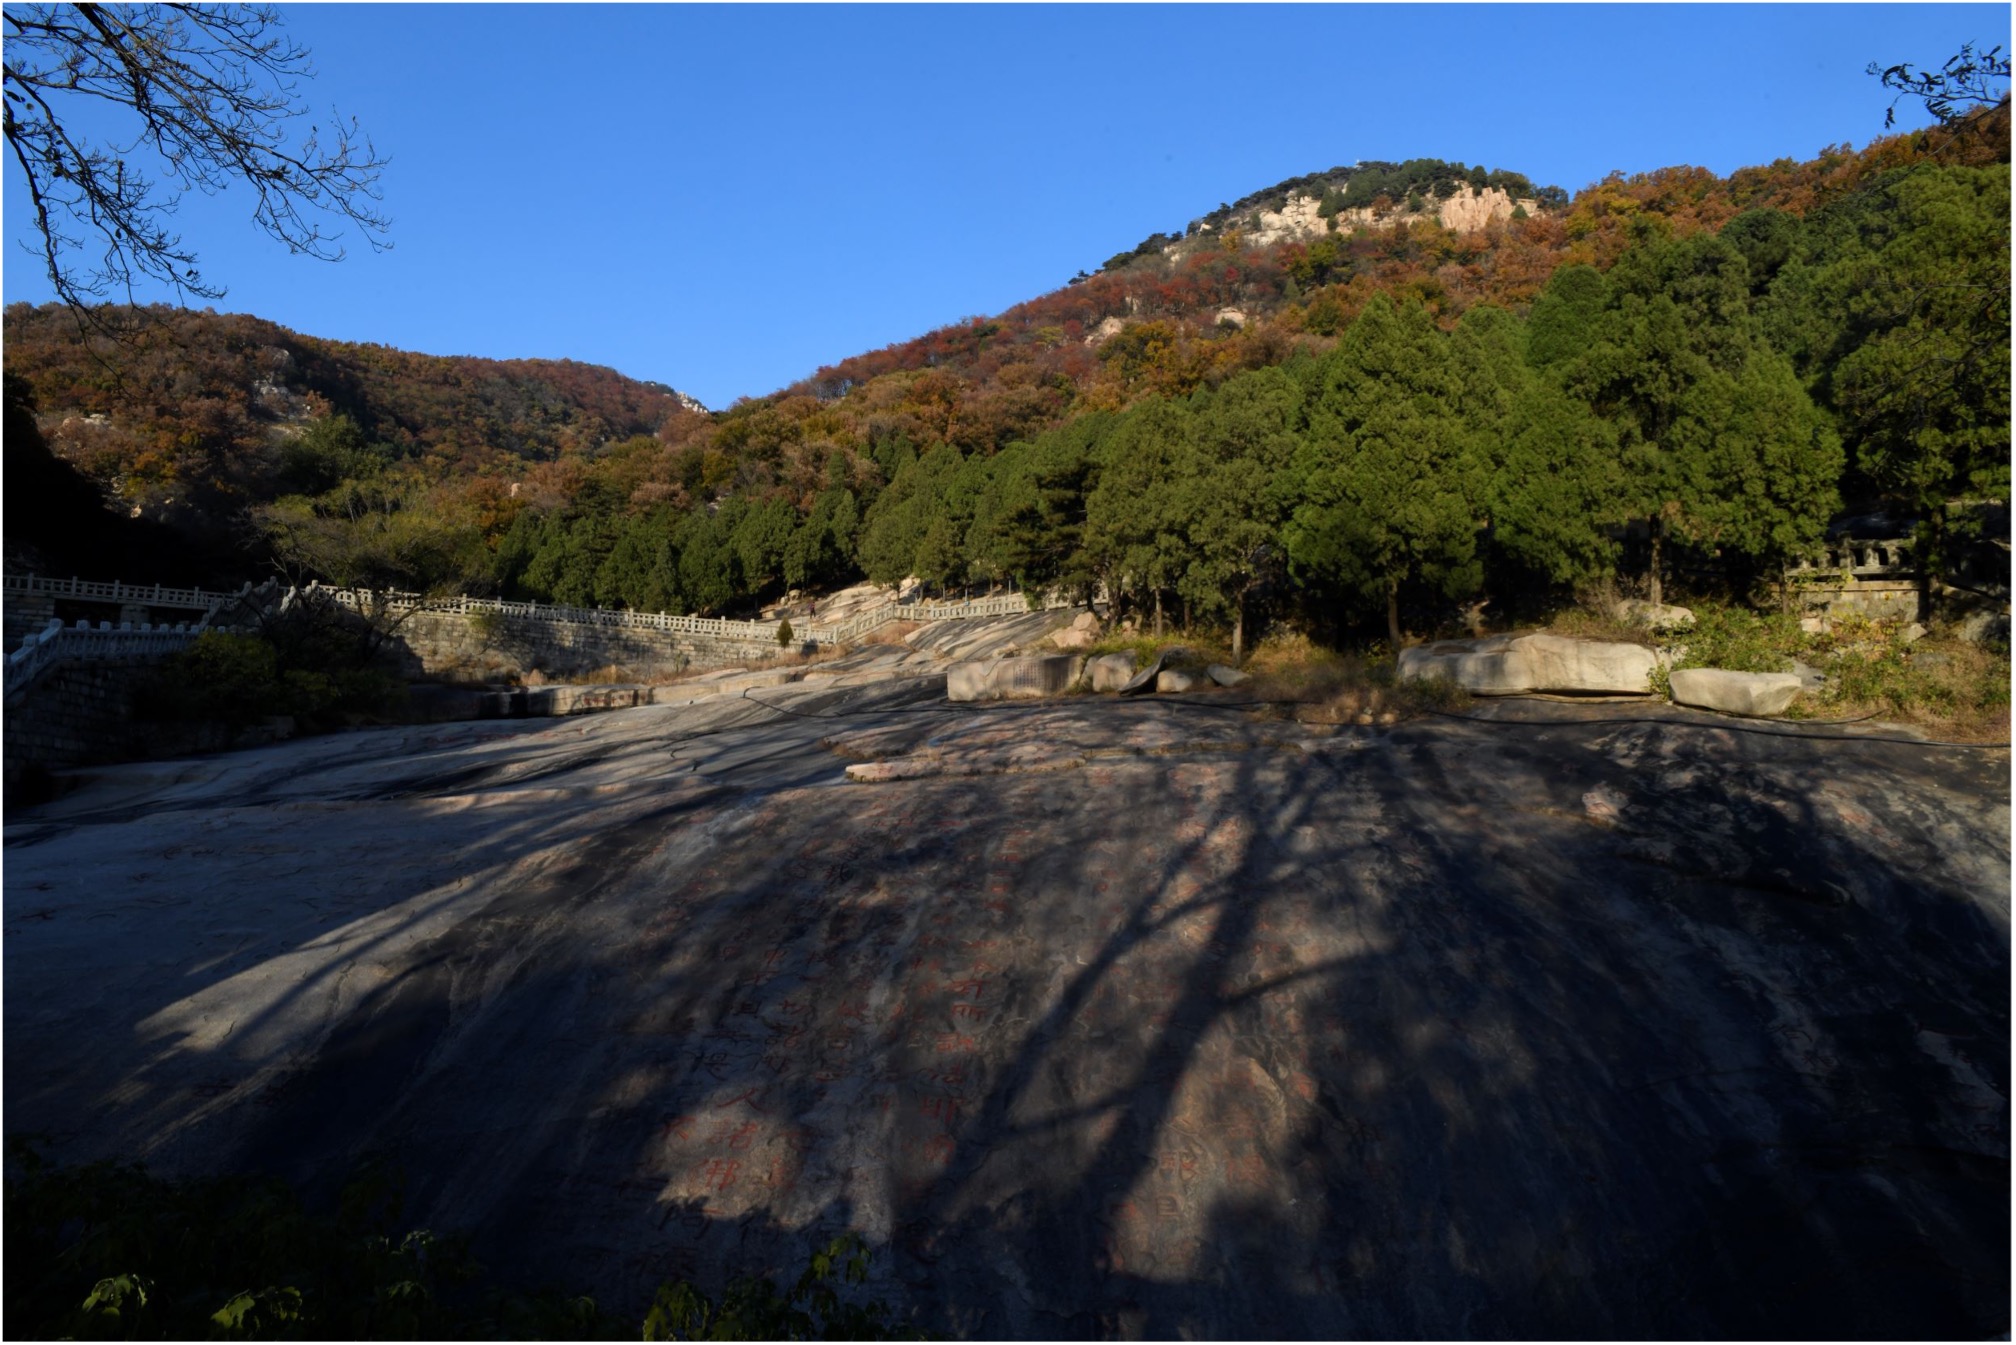 A picture of the A view of Sutra Stone Valley 經石峪 where the giant Diamond Sutra inscription is carved.